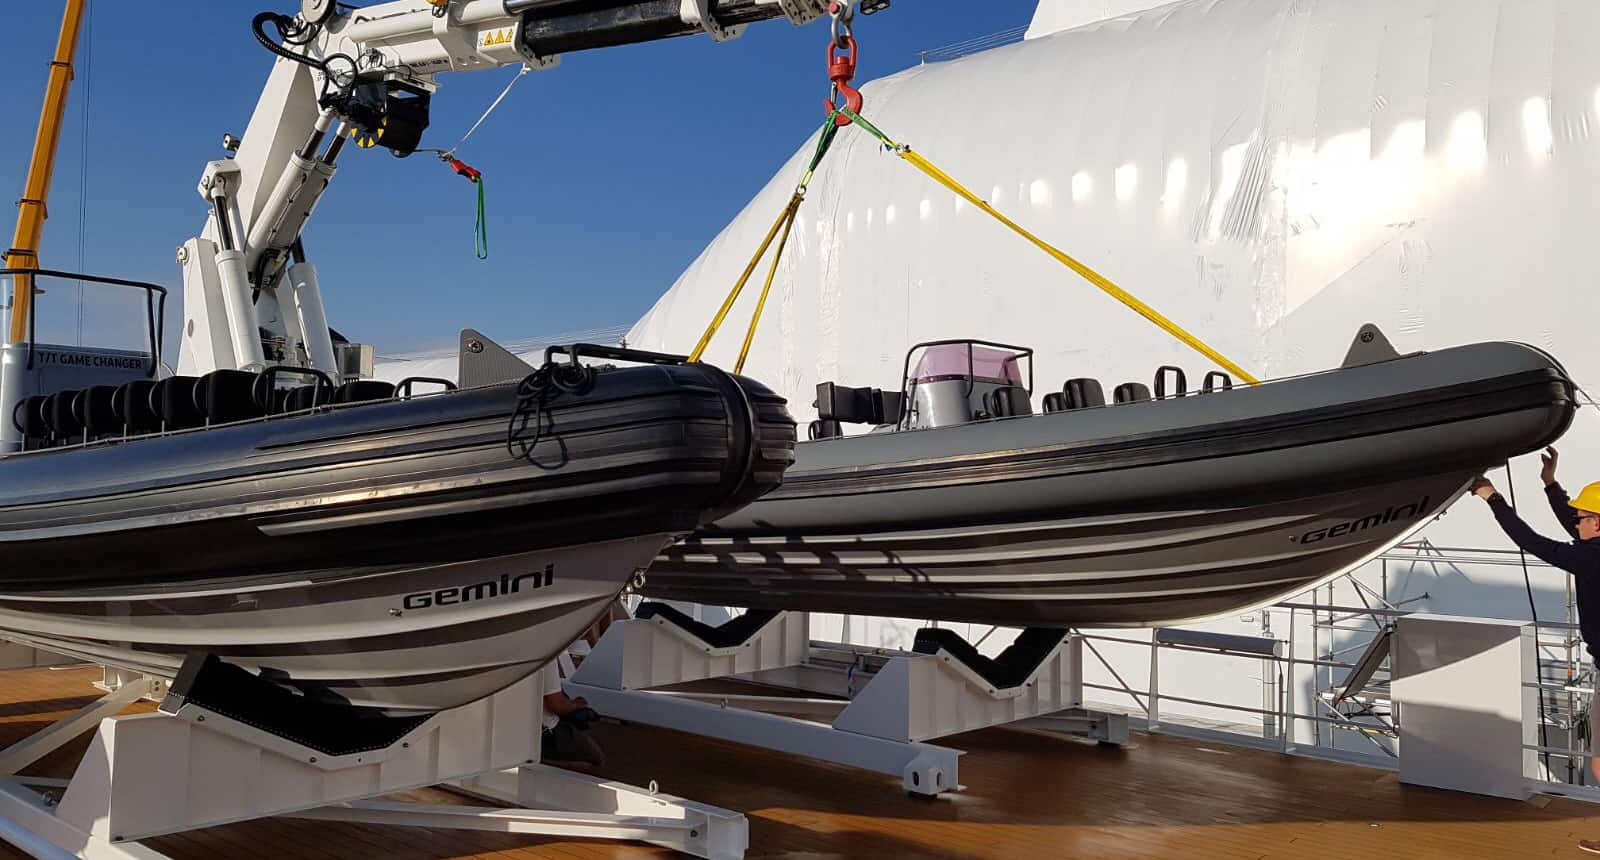 Gemini RIBs for Super Yacht ‘Damen Game Changer’ @ RIBs ONLY - Home of the Rigid Inflatable Boat